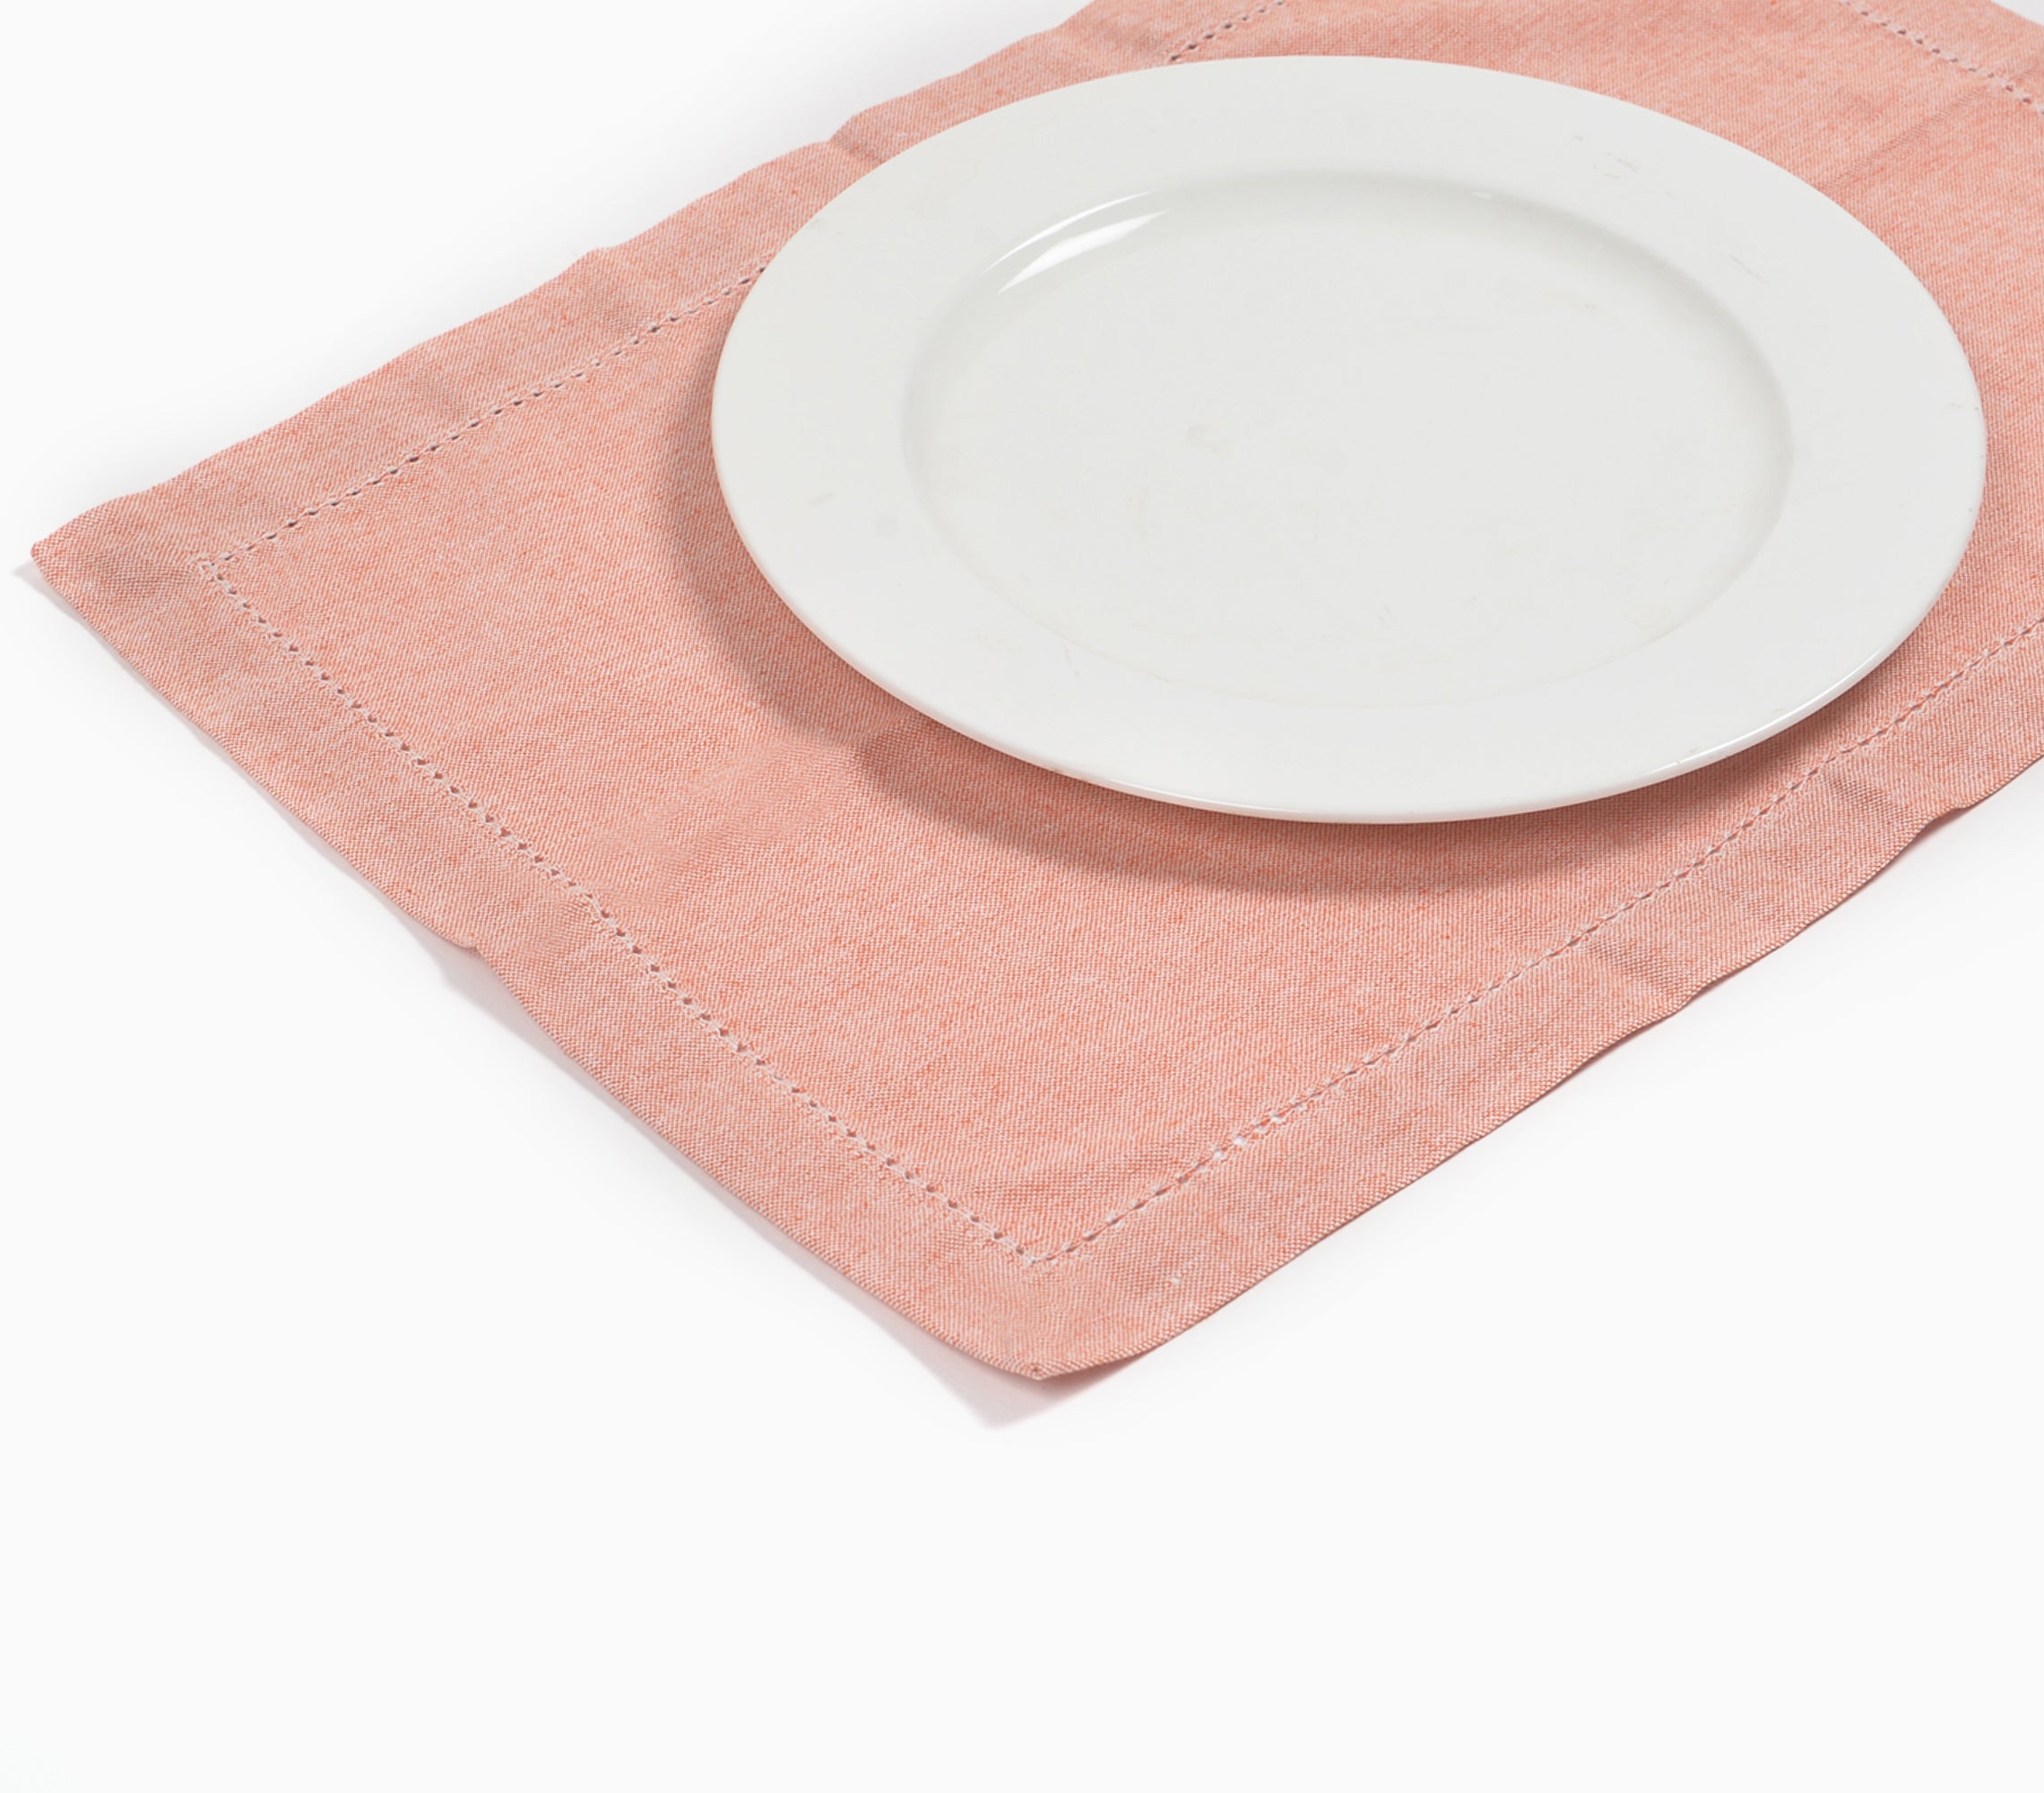 Solid Chambray Weave Placemats With Hem Stitch (set of 4)